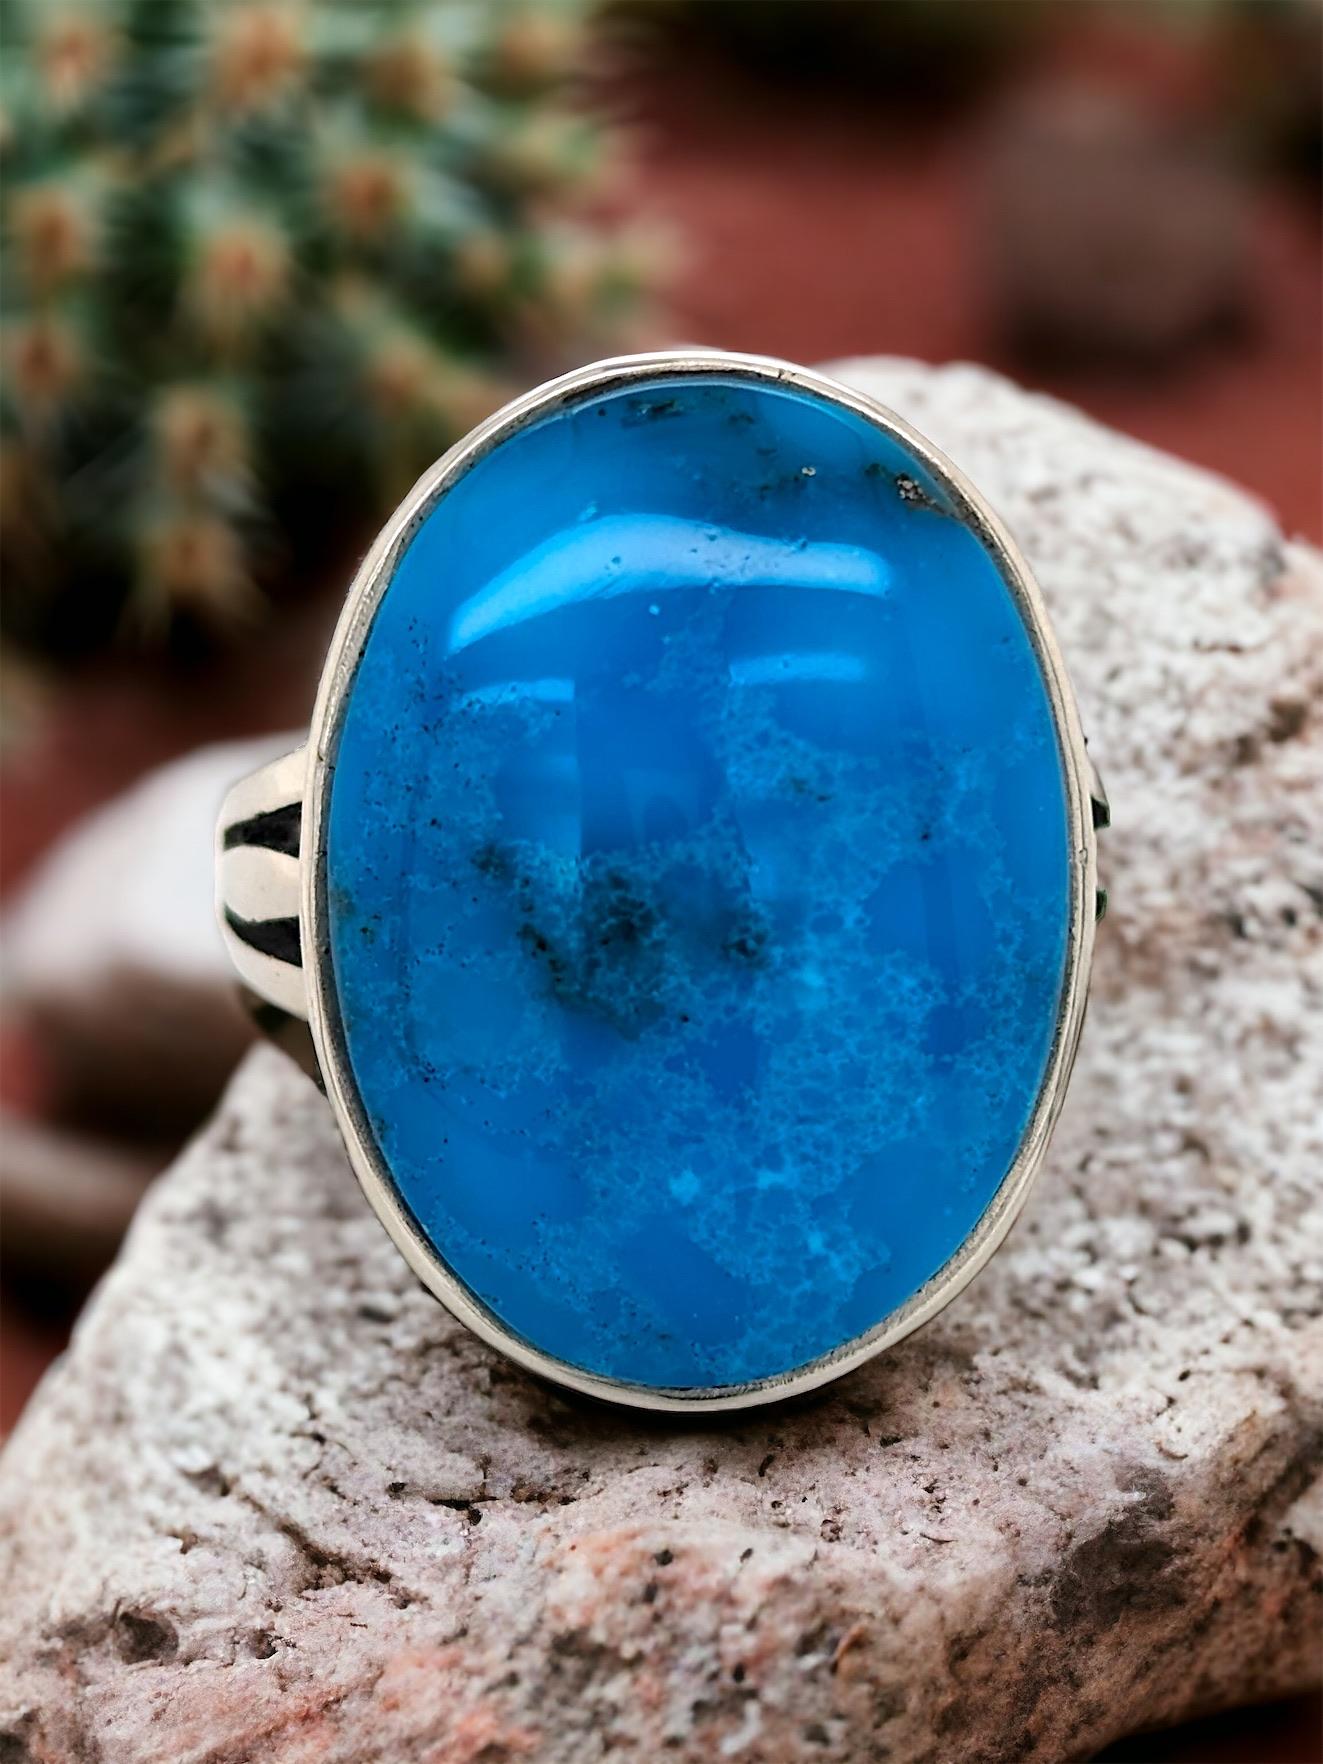 Own a piece of exceptional beauty with this captivating Size 7 Ring.  This masterpiece features a rare and stunning Bingmay turquoise gemstone, known for its captivating color and remarkable translucency.

Exceptional Gem Quality: This Bingmay